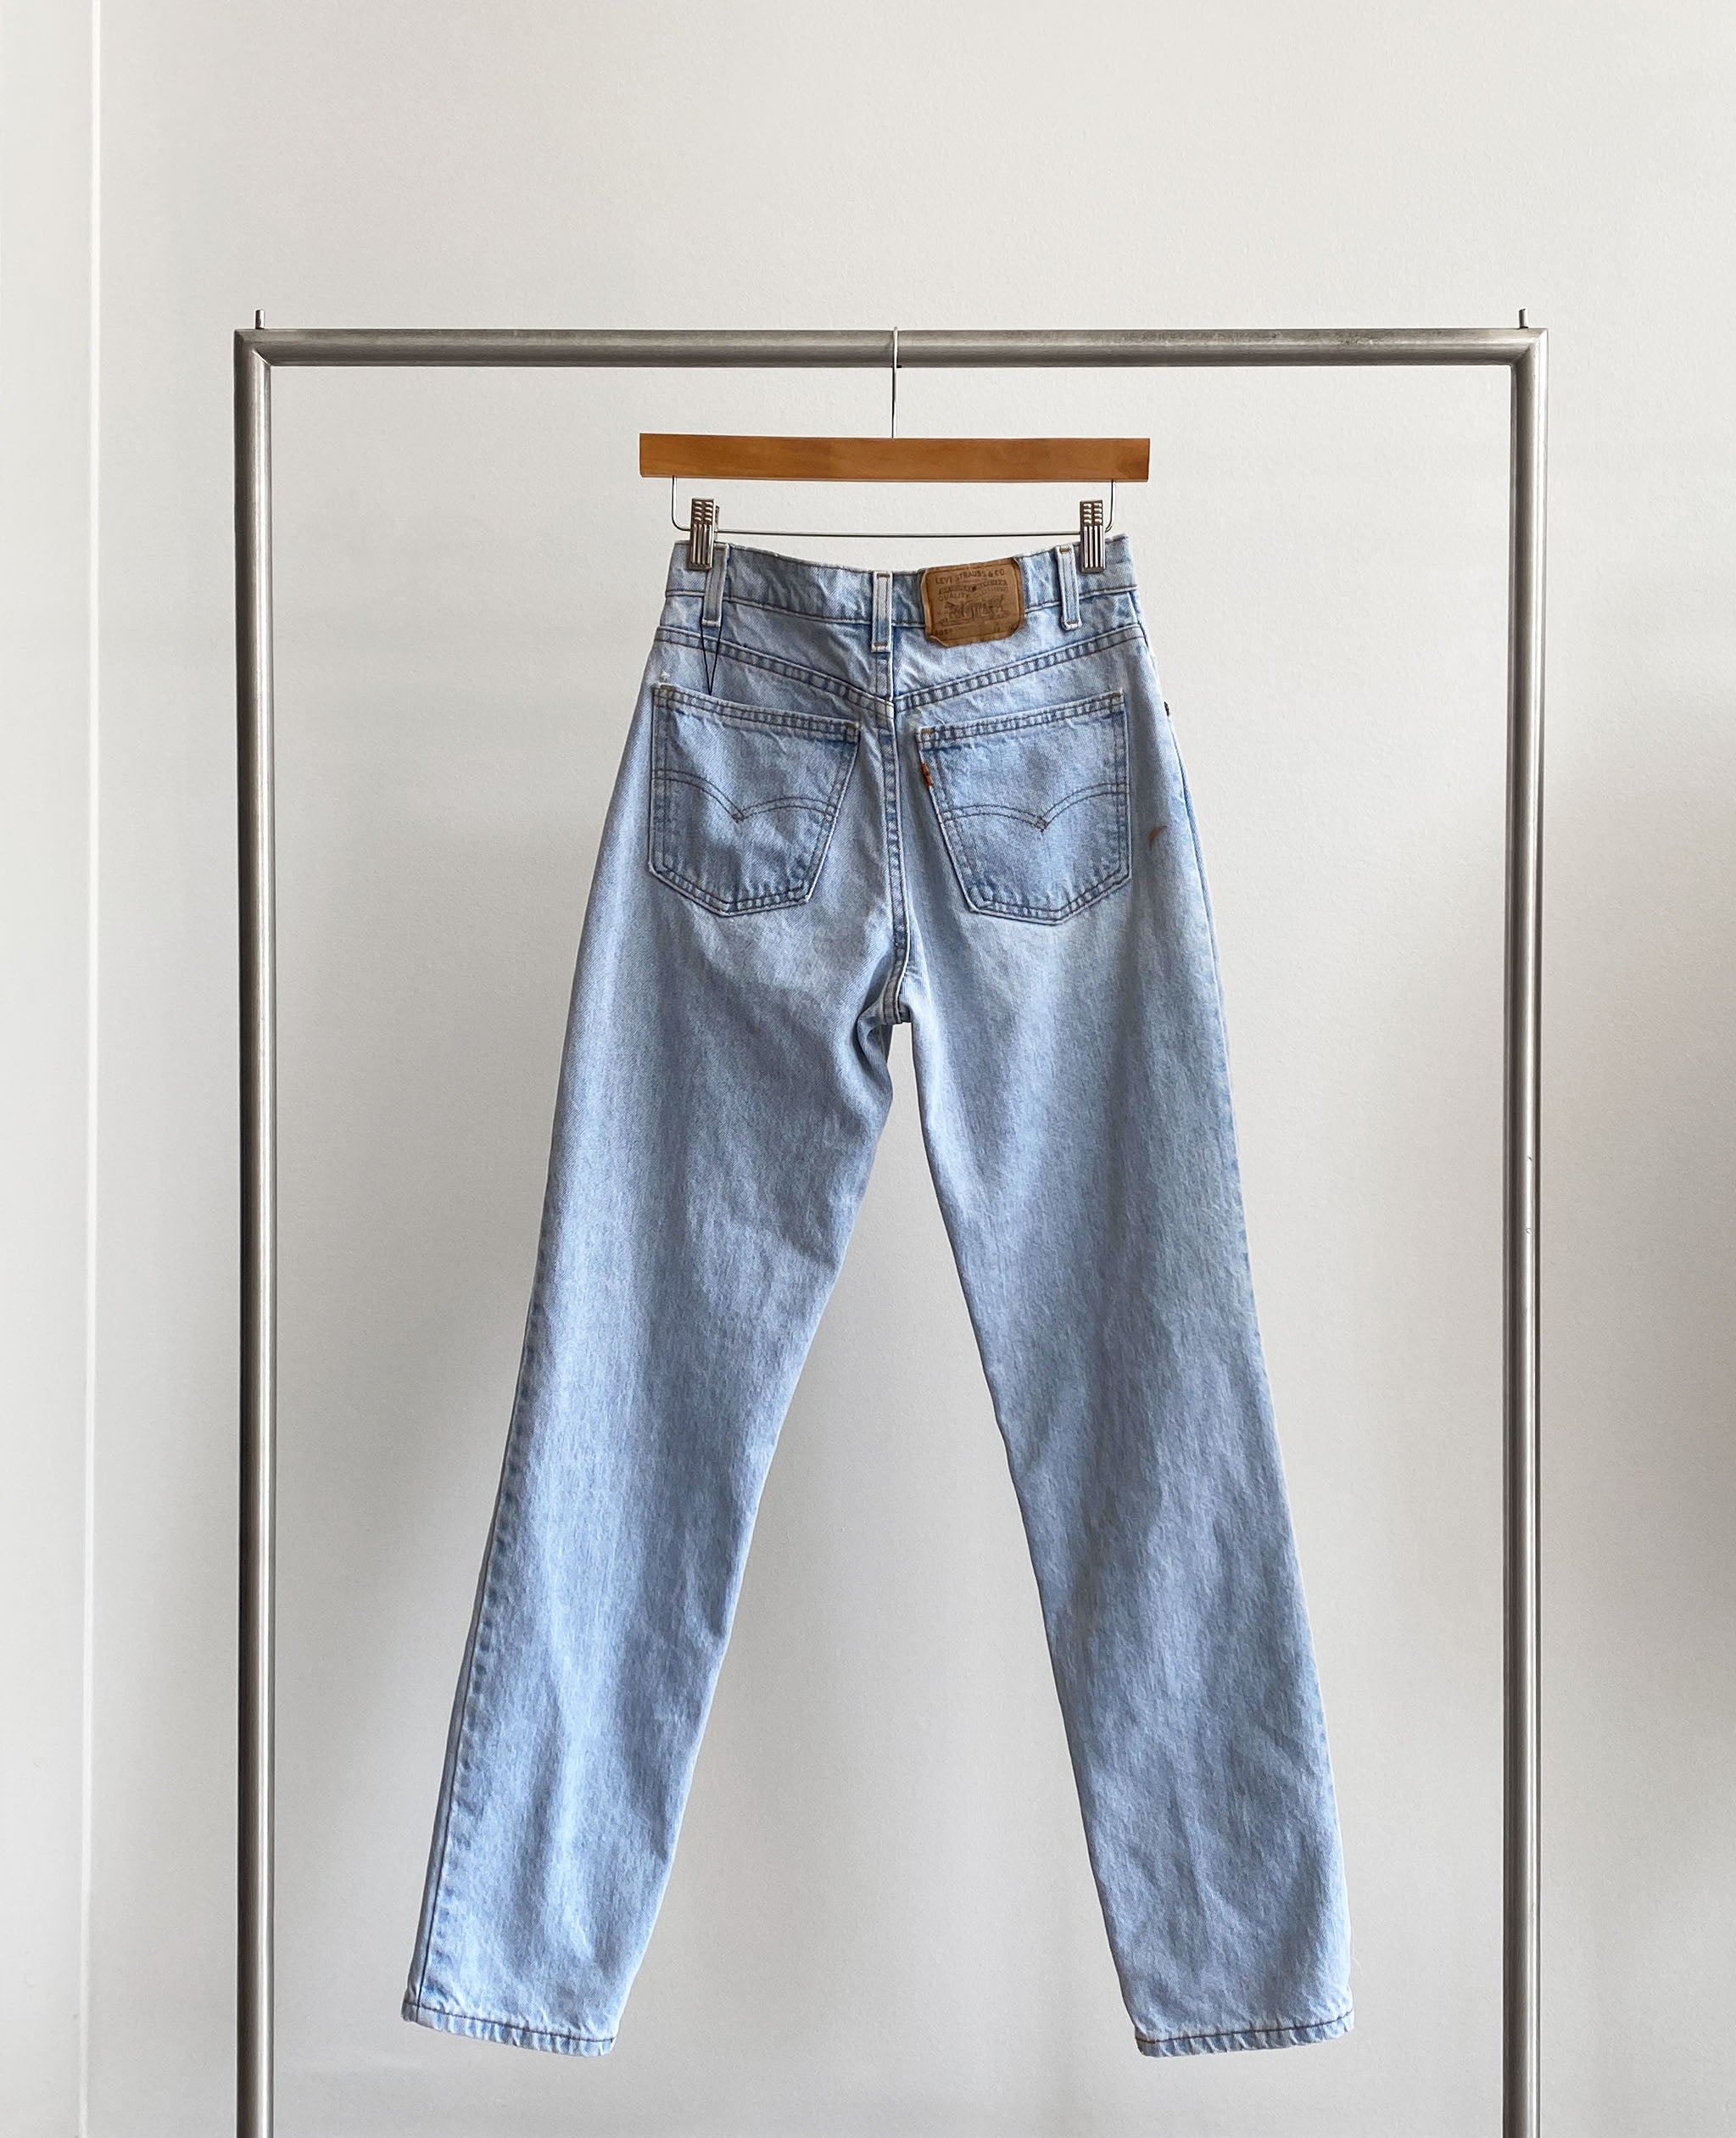 Levi's 505 Student Made in USA Denim